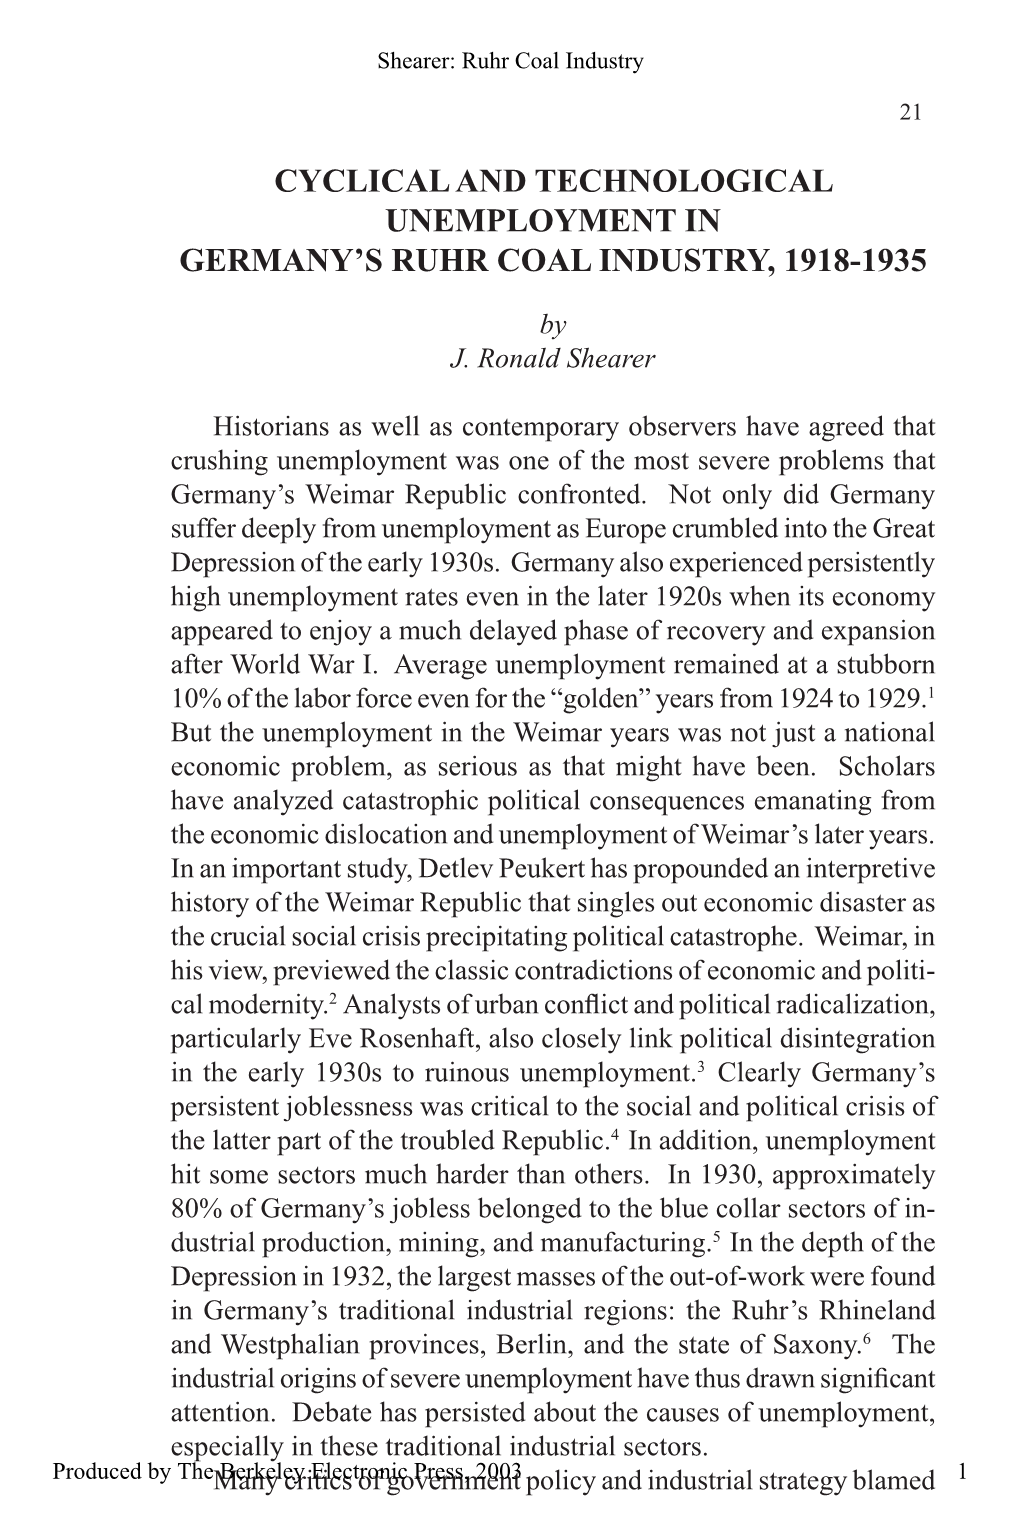 Cyclical and Technological Unemployment in Germanyâ•Žs